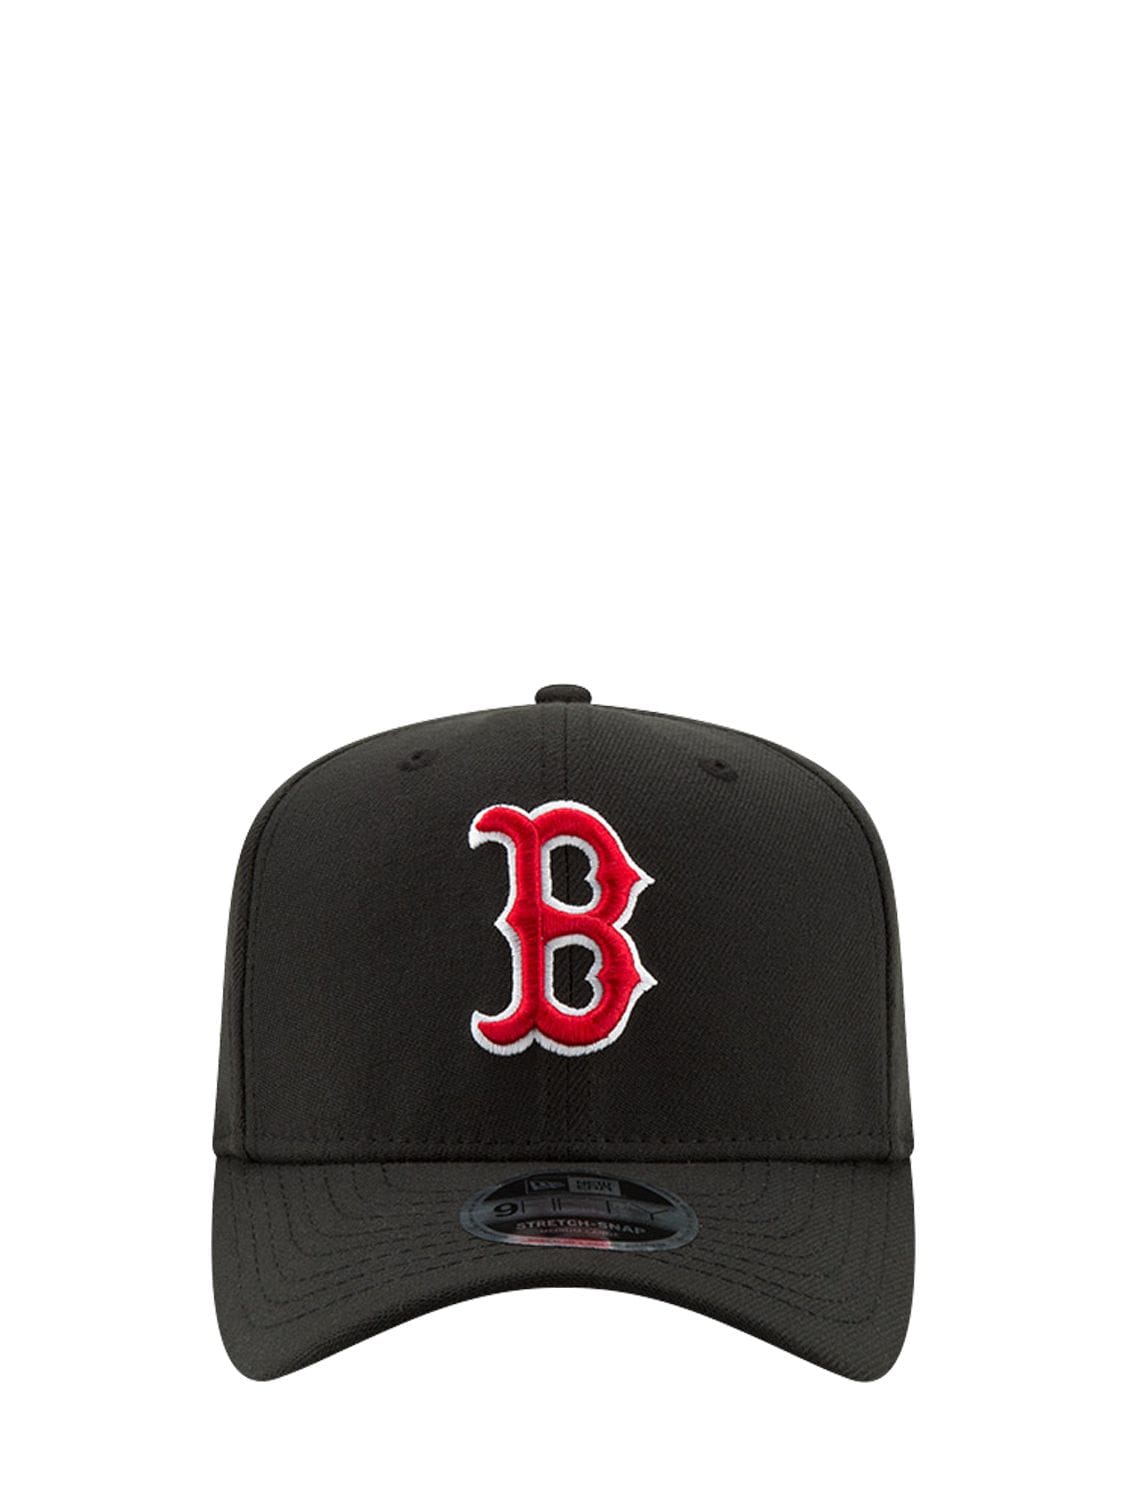 New Era Stretch Snap 9fifty Boston Red Sox Hat In Black